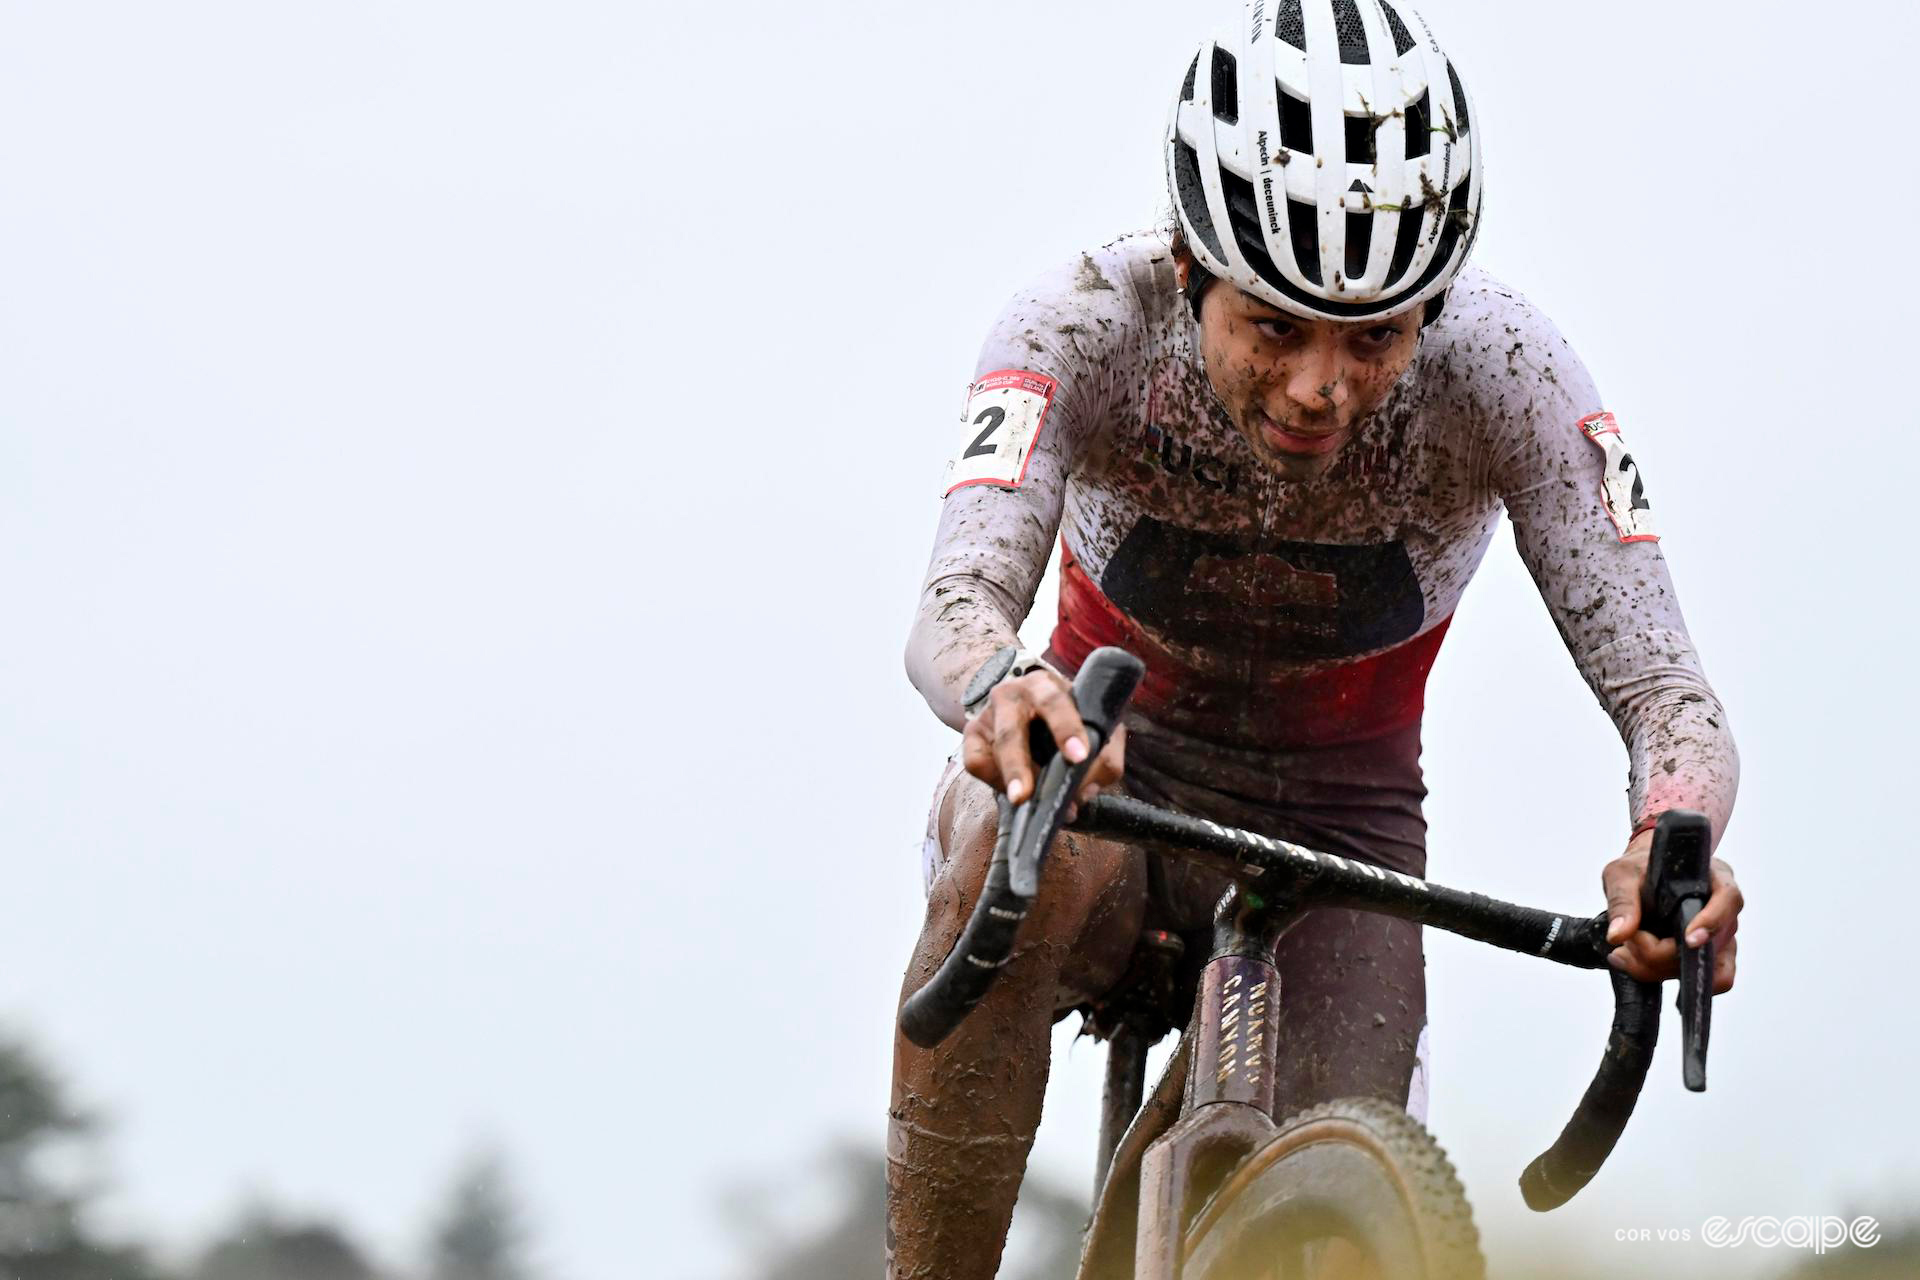 Medium shot of Ceylin del Carmen Alvarado, her white and red World Cup leader's jersey is splattered with mud, digs deep during CX World Cup Dublin, an overcast sky overhead.